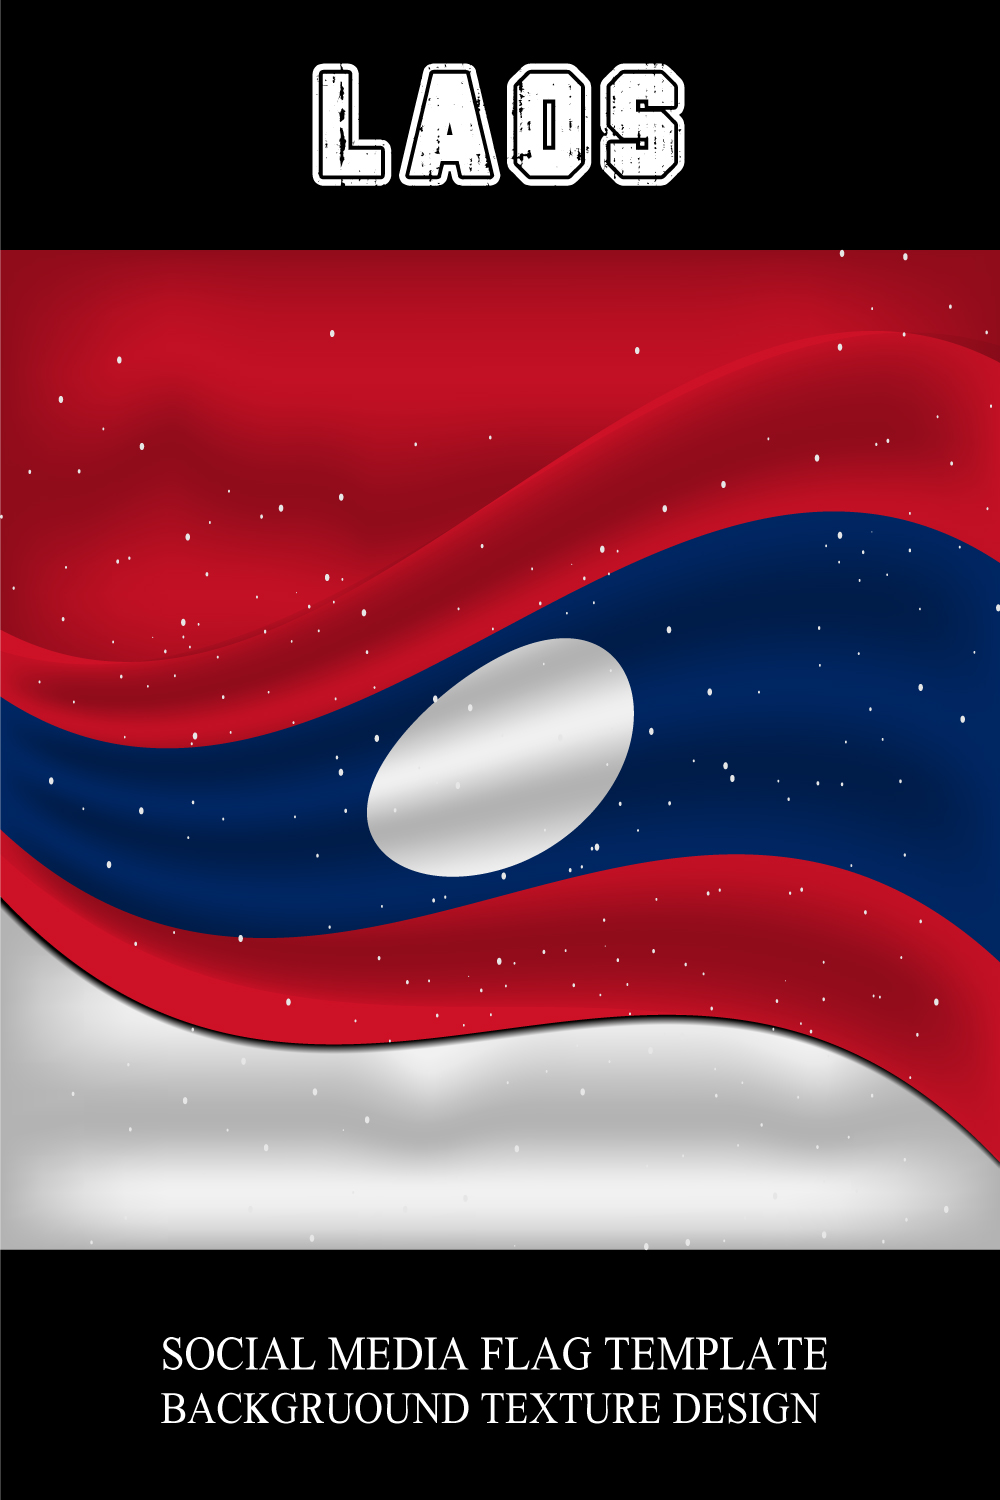 Beautiful image of the flag of Laos.